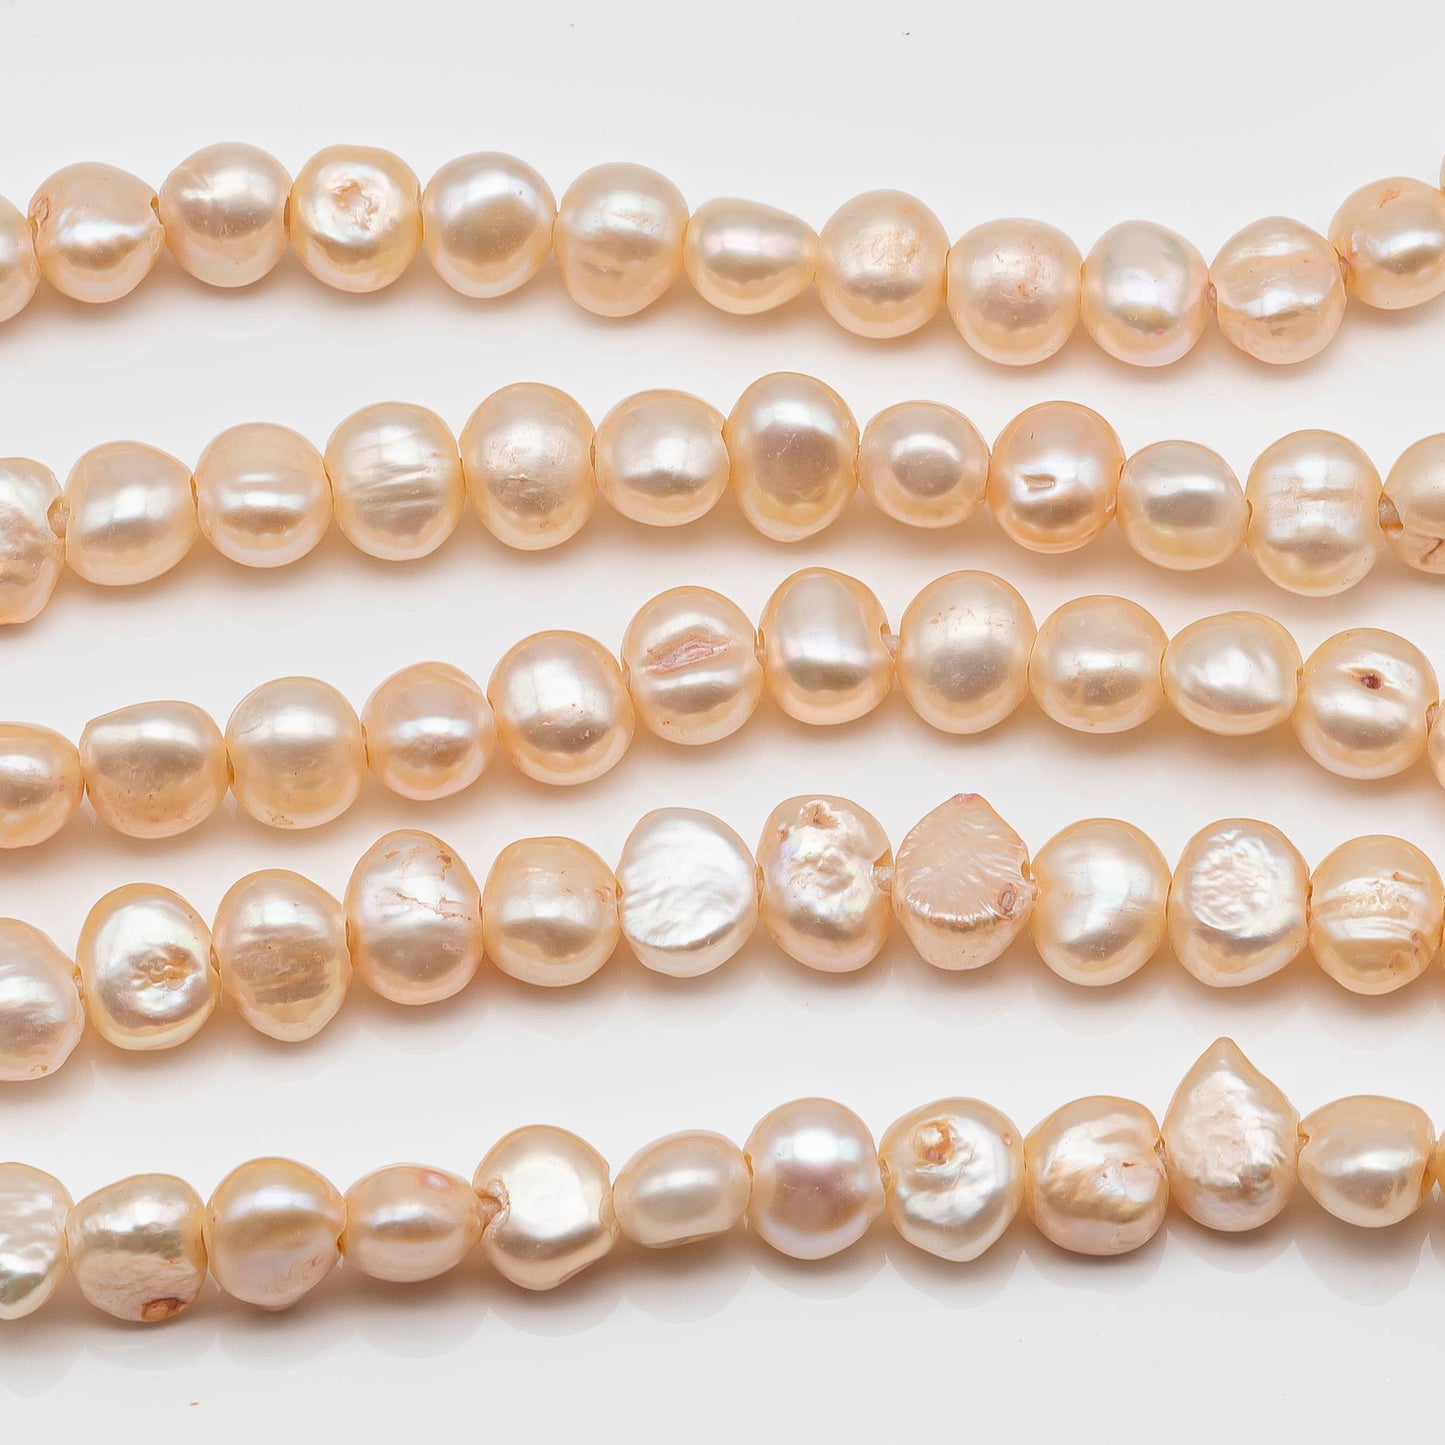 10-11mm Large Hole Bead in Light Peach , Freshwater Pearl Nugget Shape with 2.5mm Hole in 8 inch Strand for Jewelry Making, SKU # 1568FW